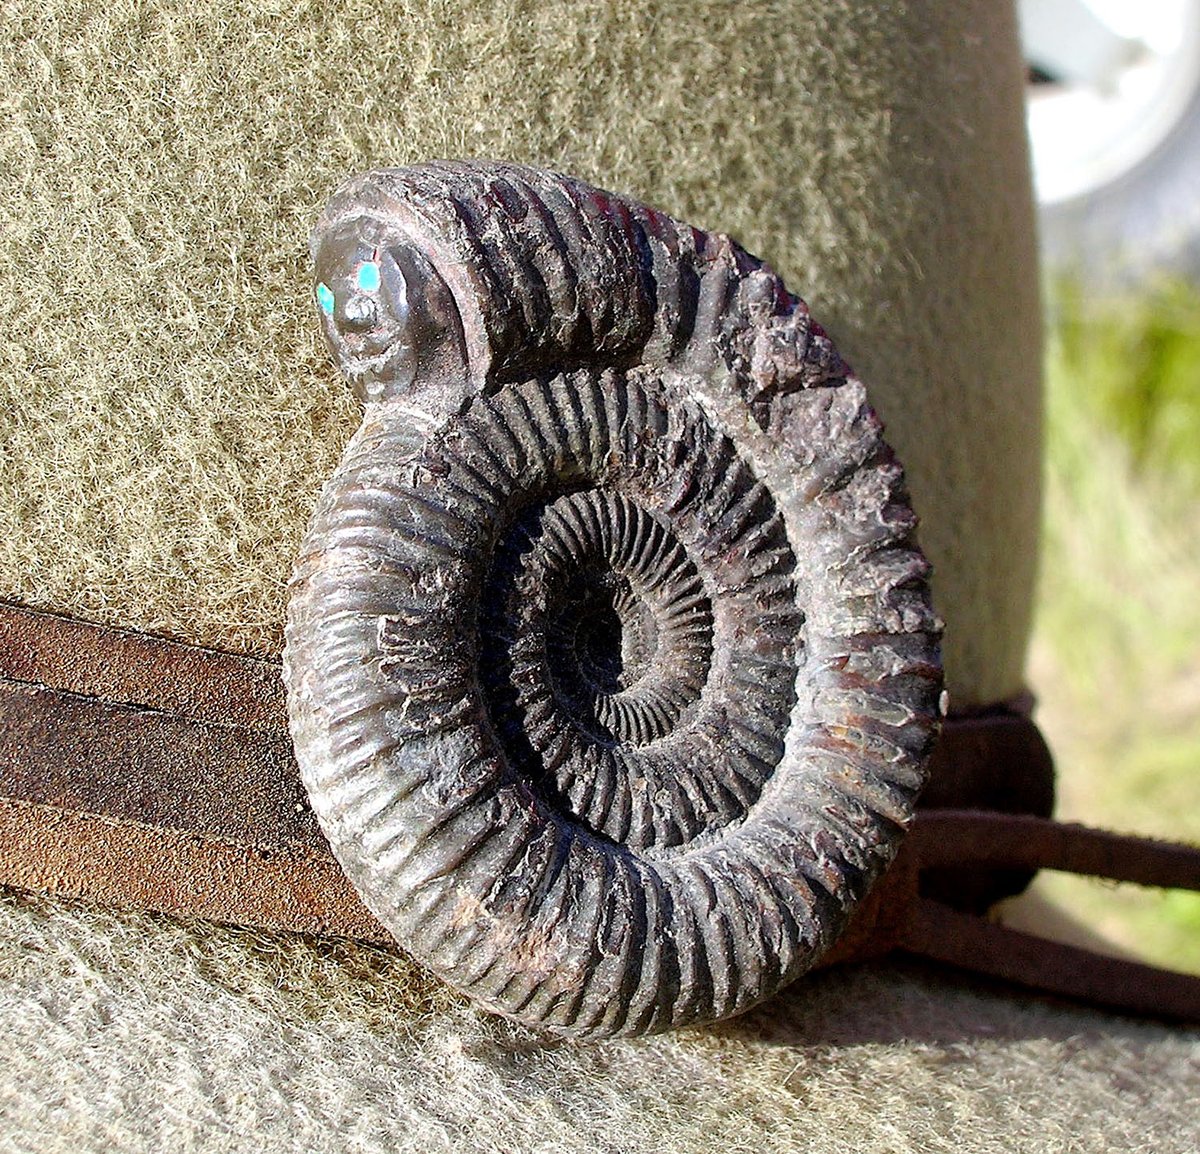 #FossilFriday Unusual anthropomorphic version of a snakestone ammonite adorning the band of a hat worn by a palaeontologist in South Dakota.